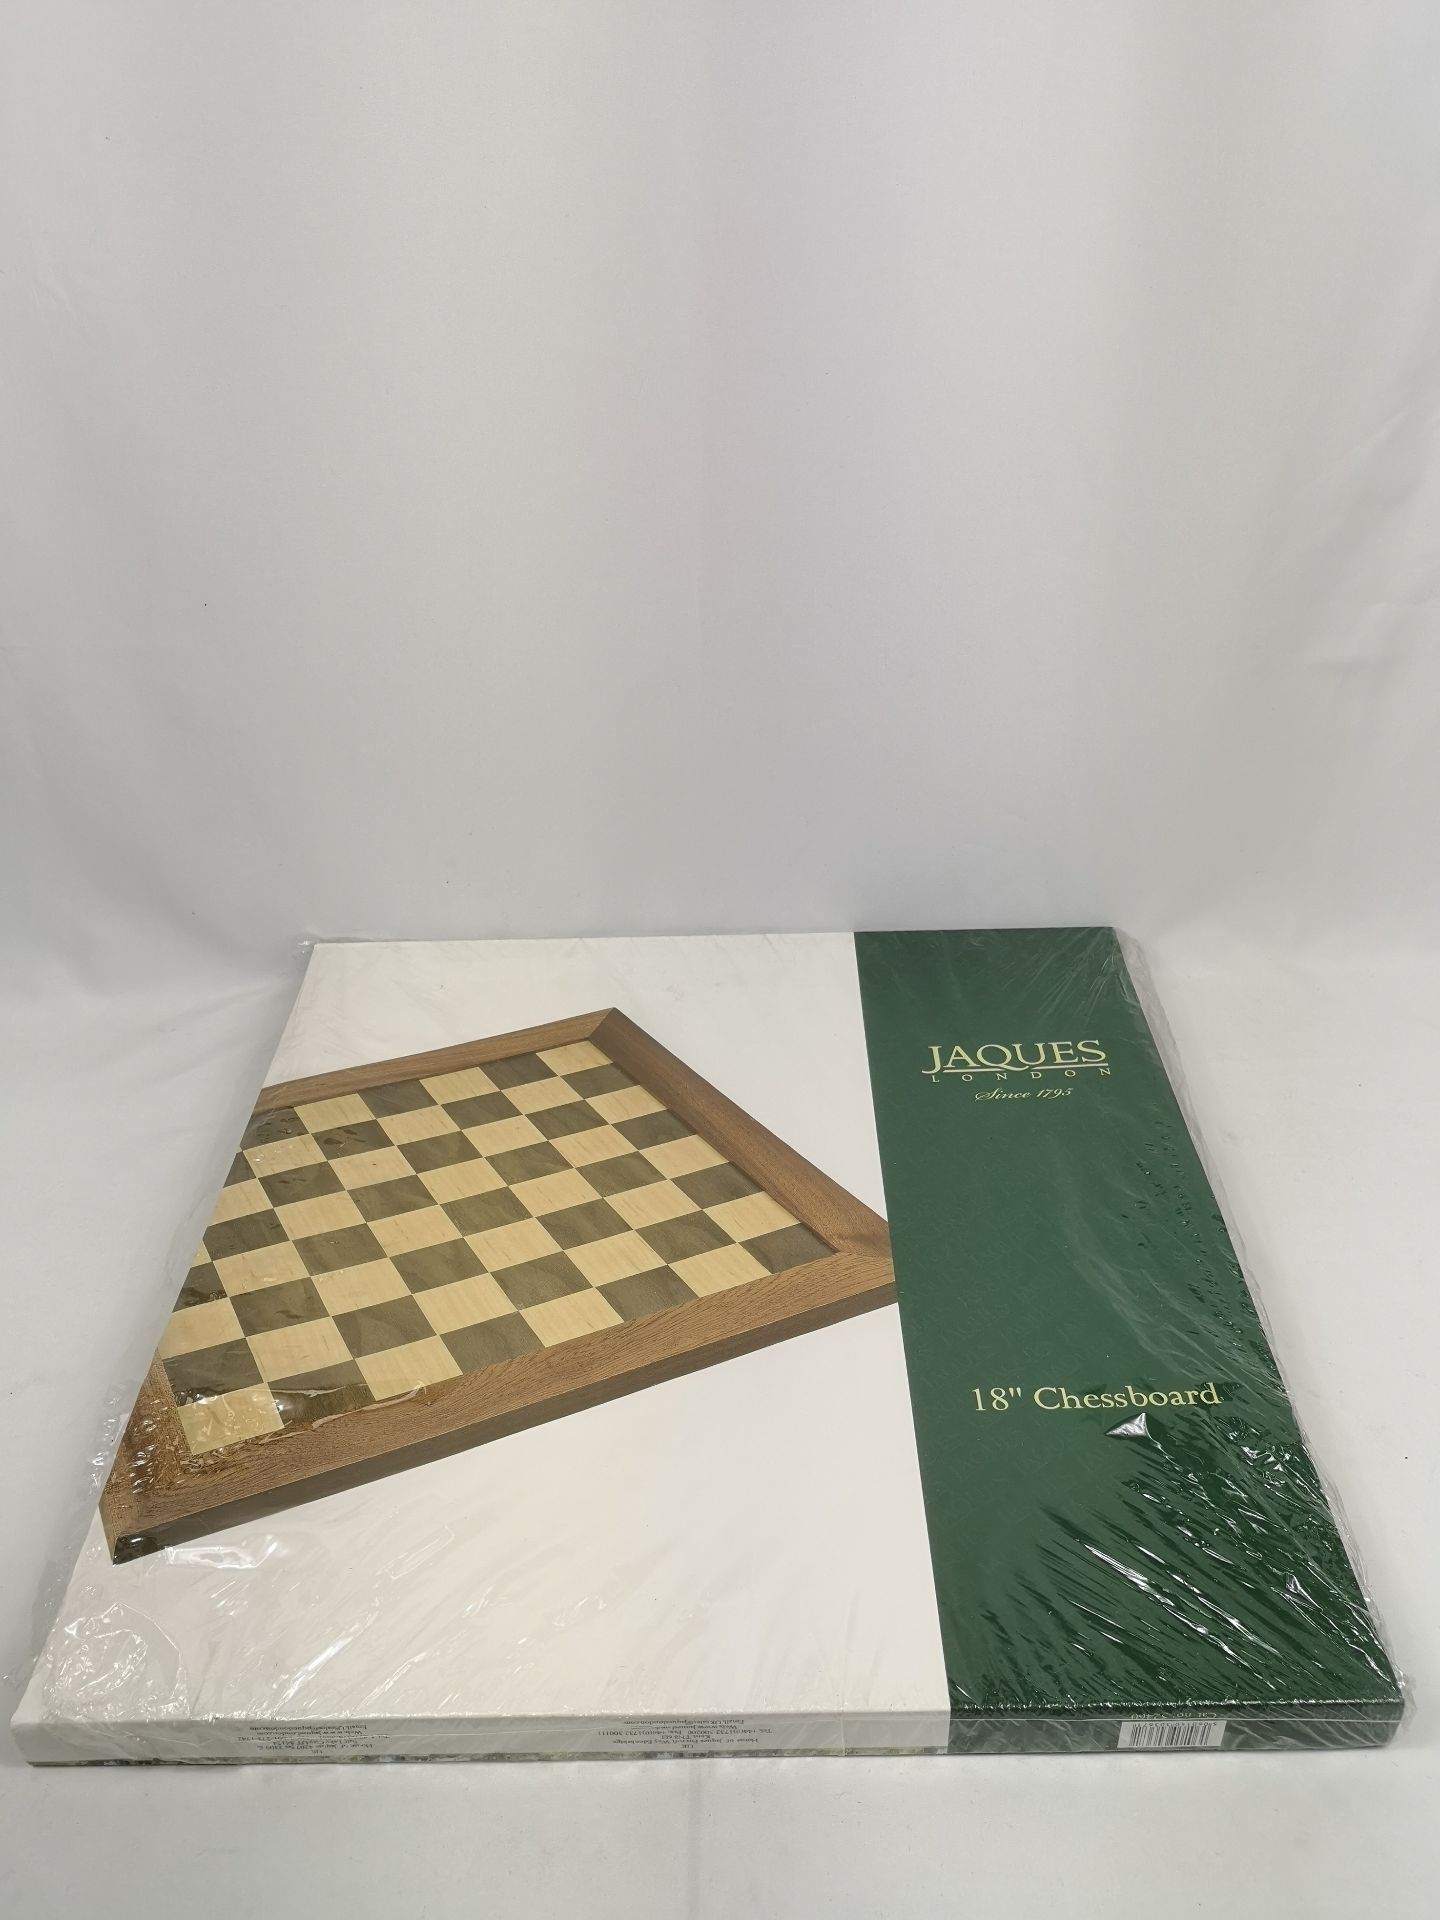 Jacques 18" walnut & sycamore chess board - Image 4 of 4